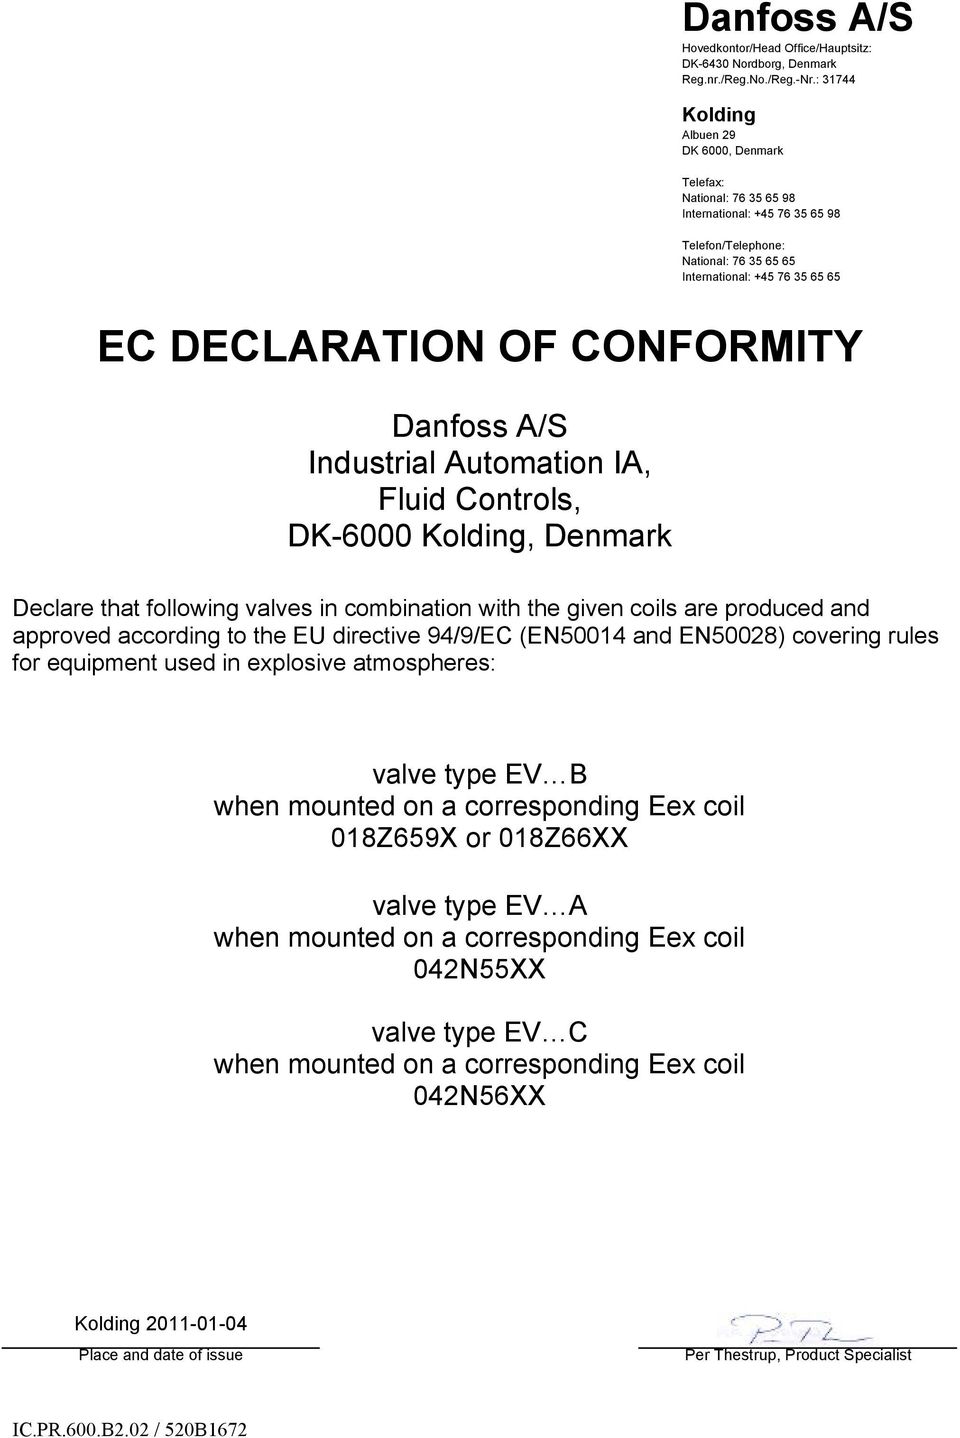 Automation IA, Fluid Controls, DK-6000, Denmark Declare that following valves in combination with the given coils are produced and approved according to the EU directive 94/9/EC (EN50014 and EN50028)